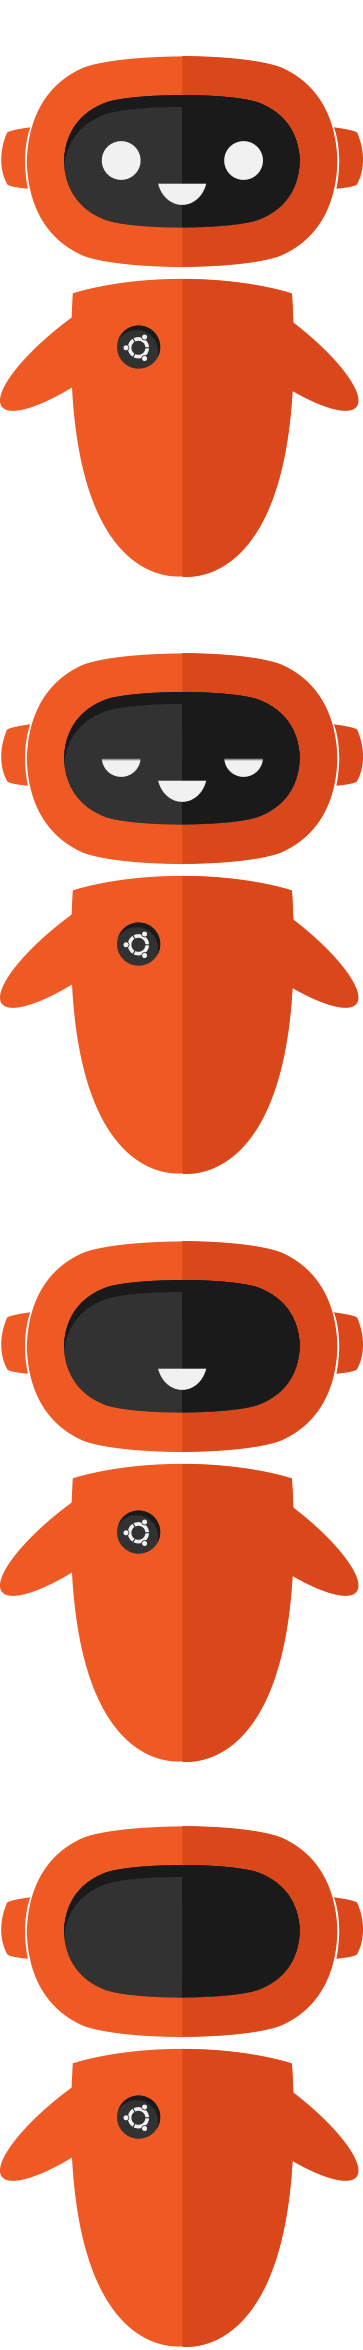 0_1540263839800_PowerDown-images.png